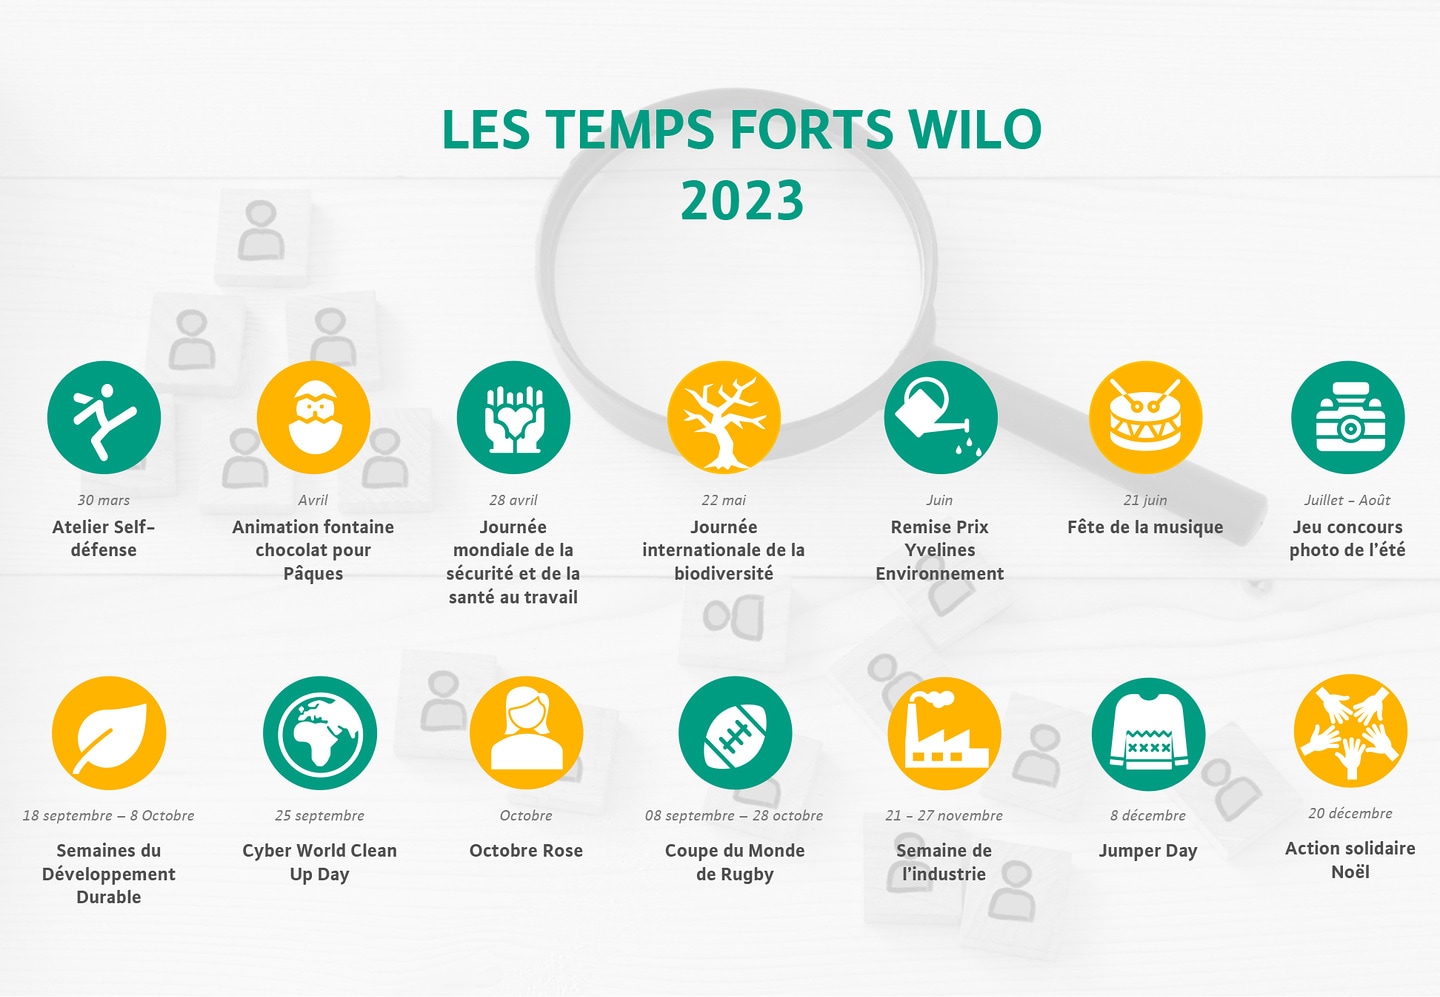 Les temps forts 2023 Wilo France